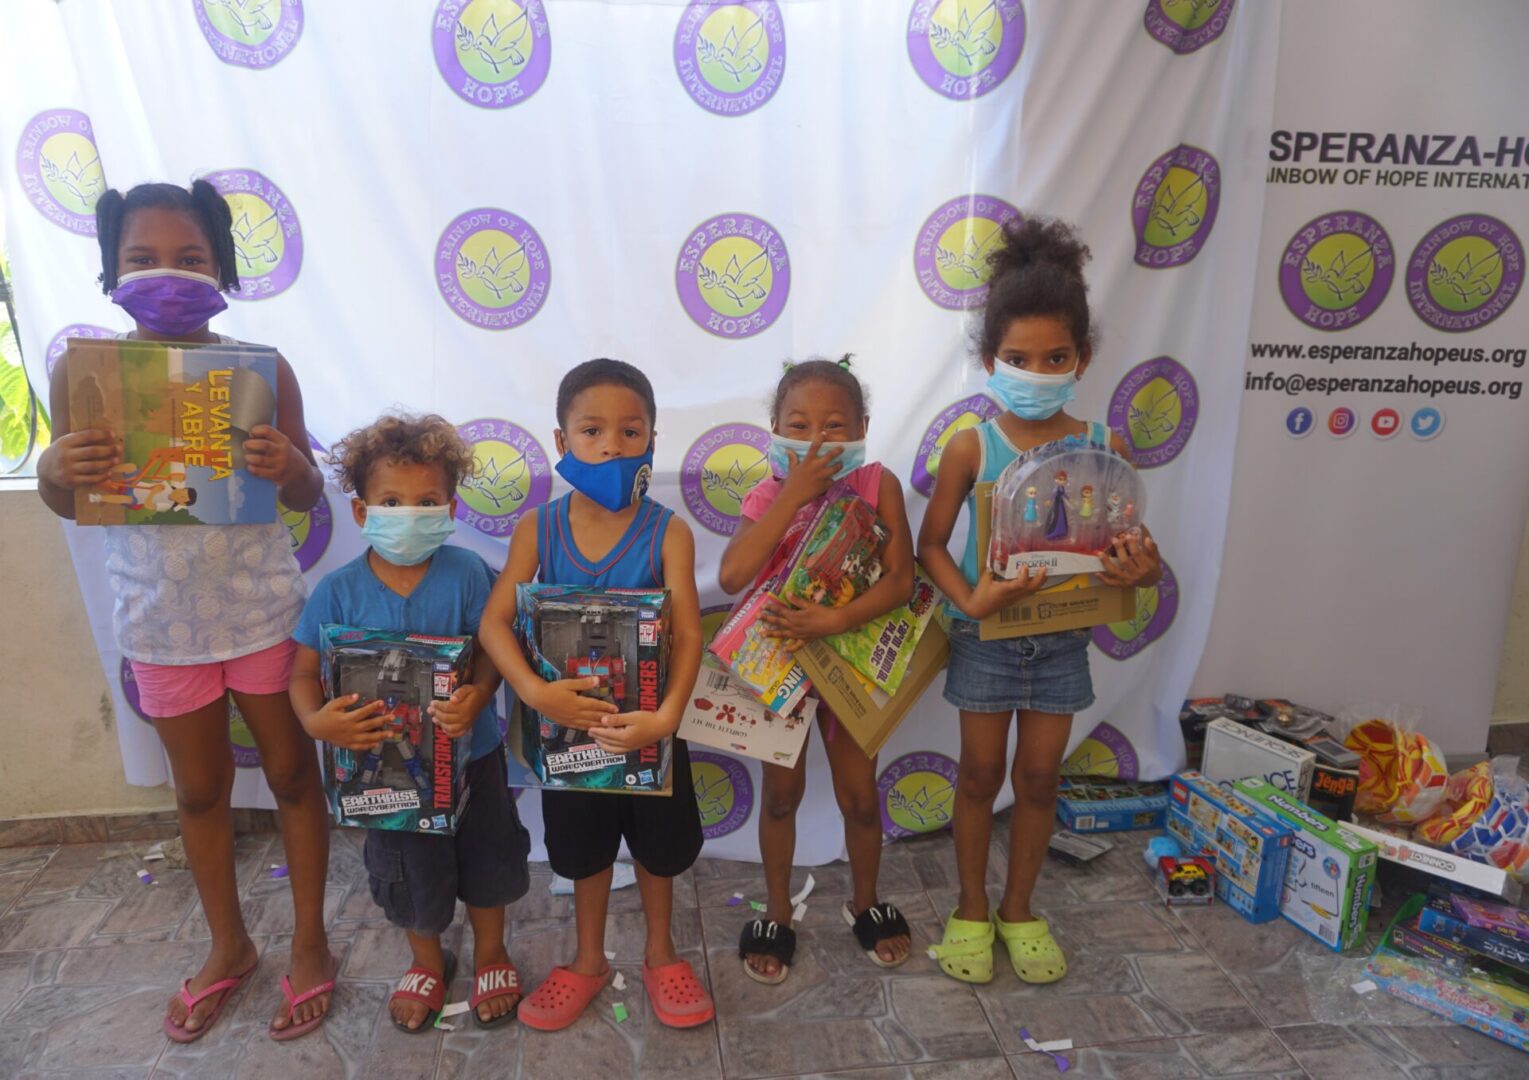 Five children standing against the Esperanza-Hope backdrop with their toys and books, batch 8